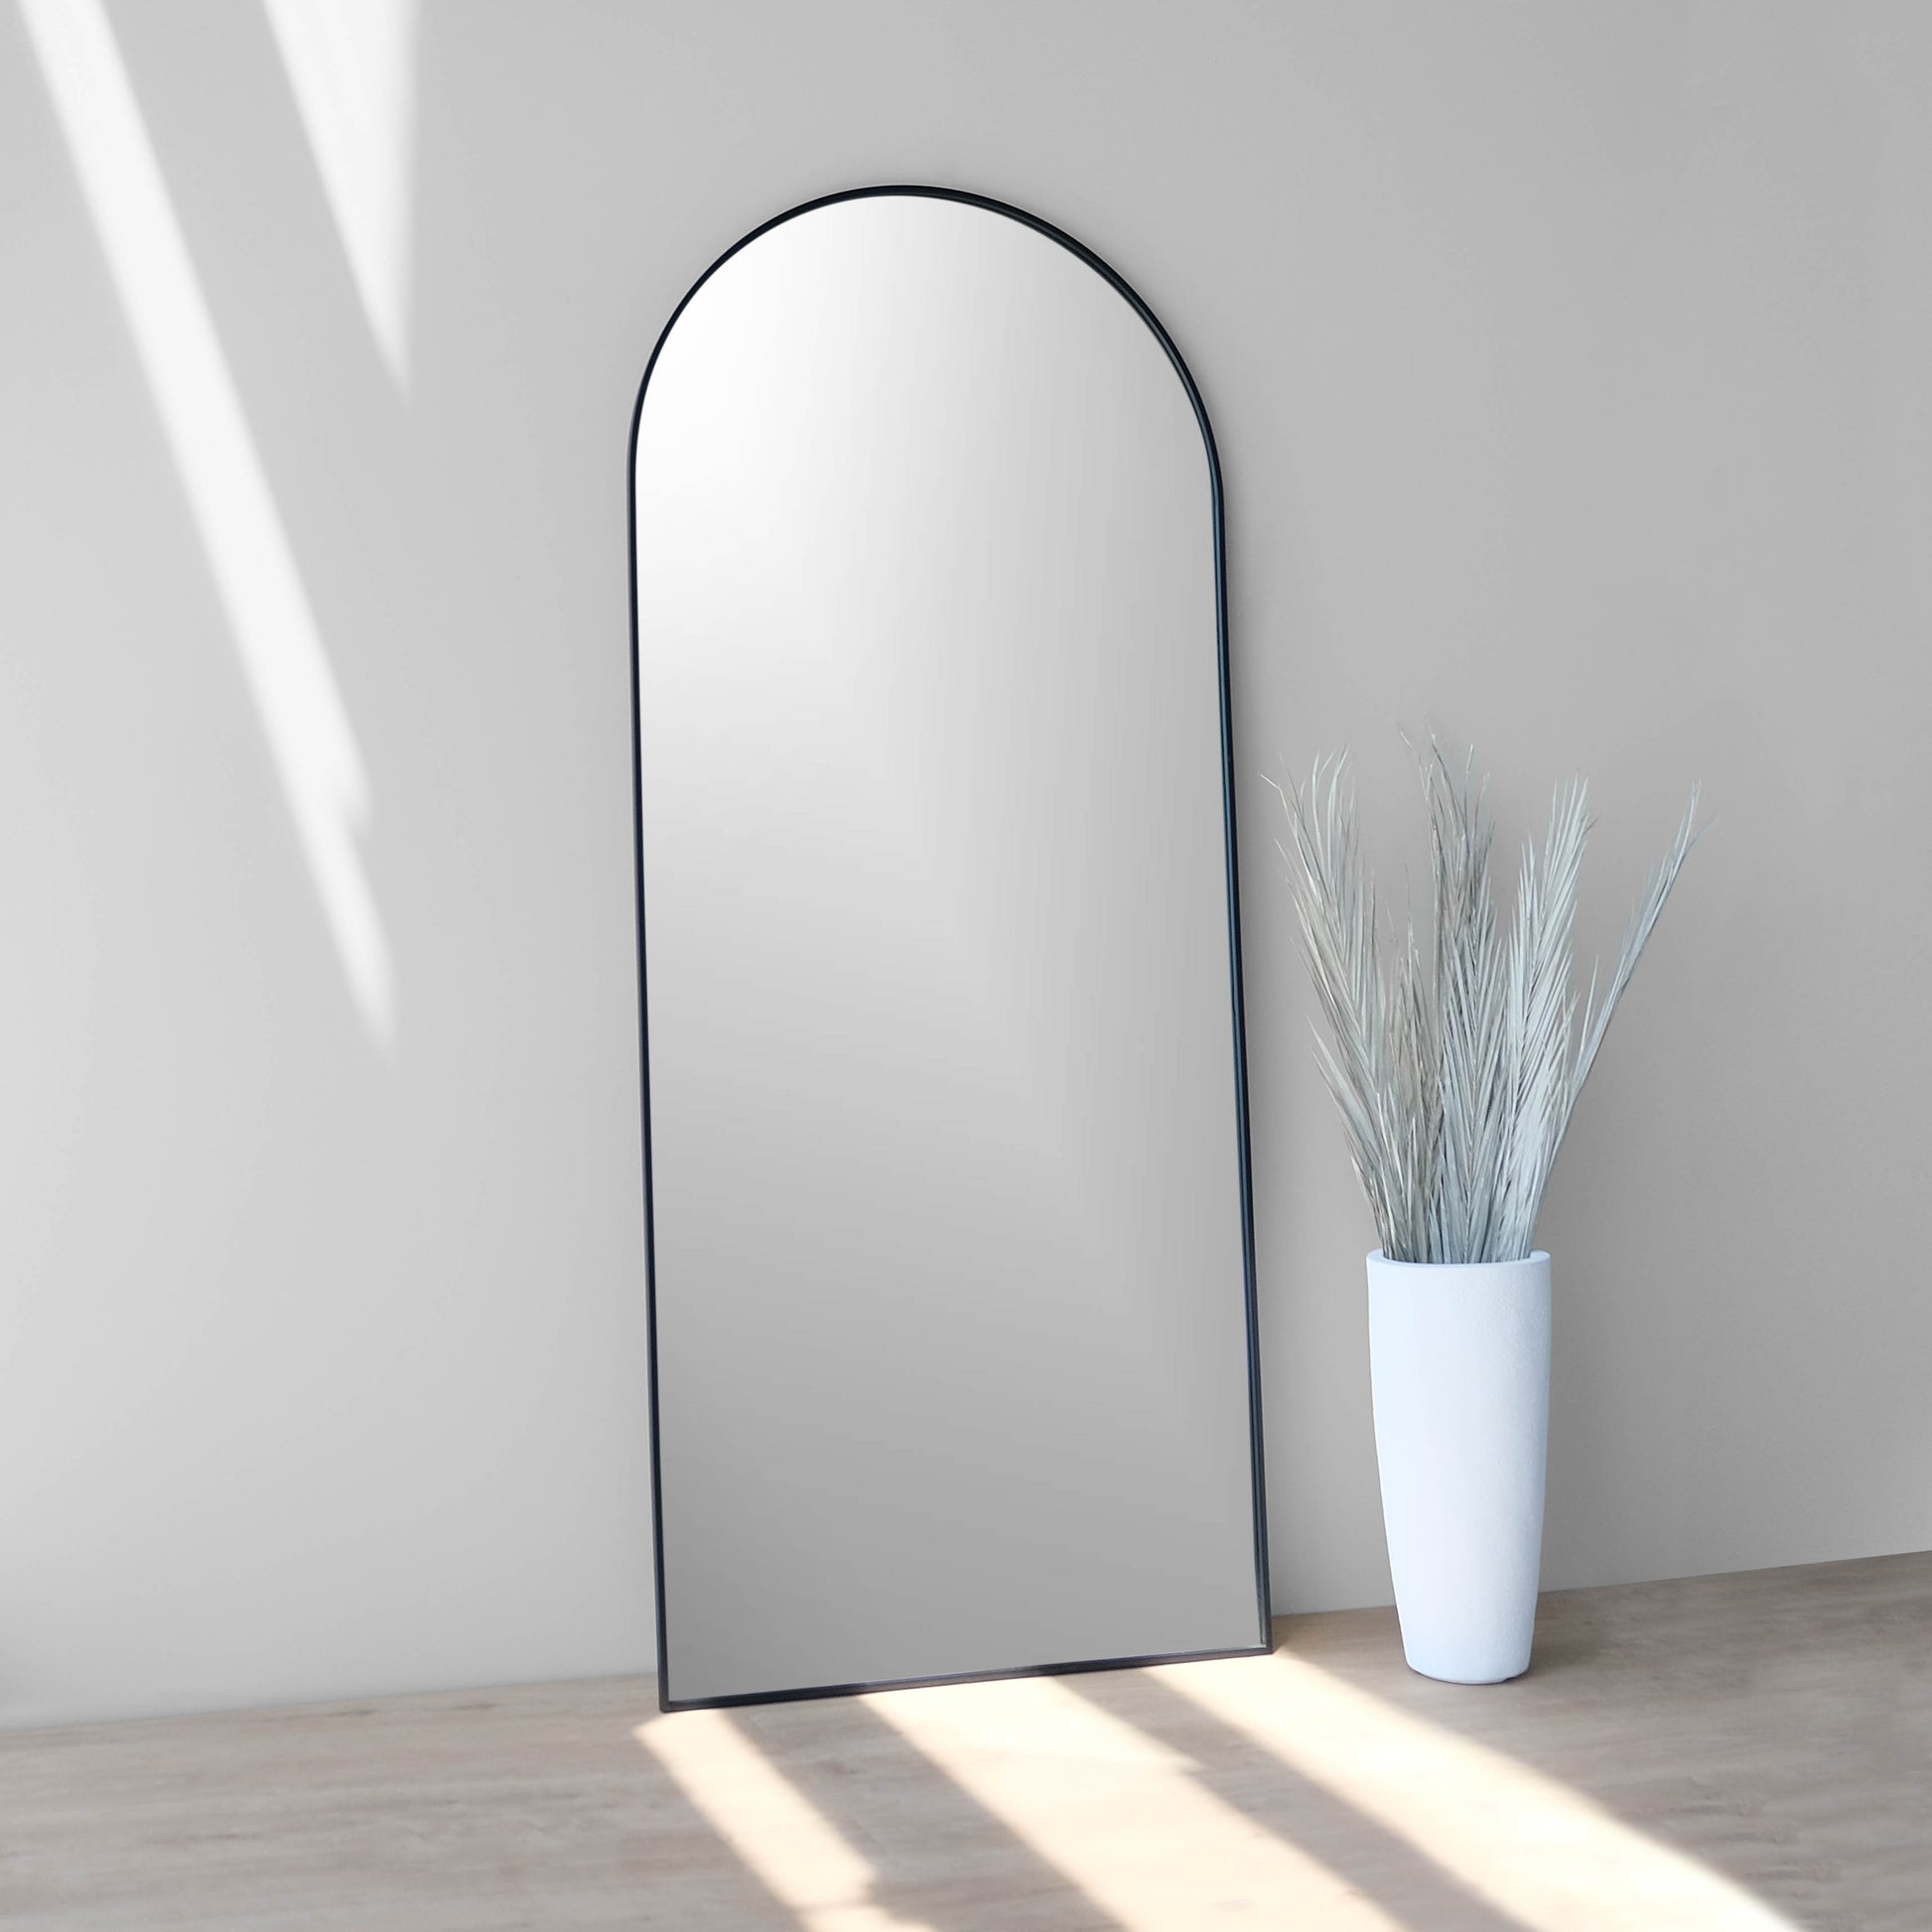 Side view of 30x70-inch iron black arch mirror leaning against wall